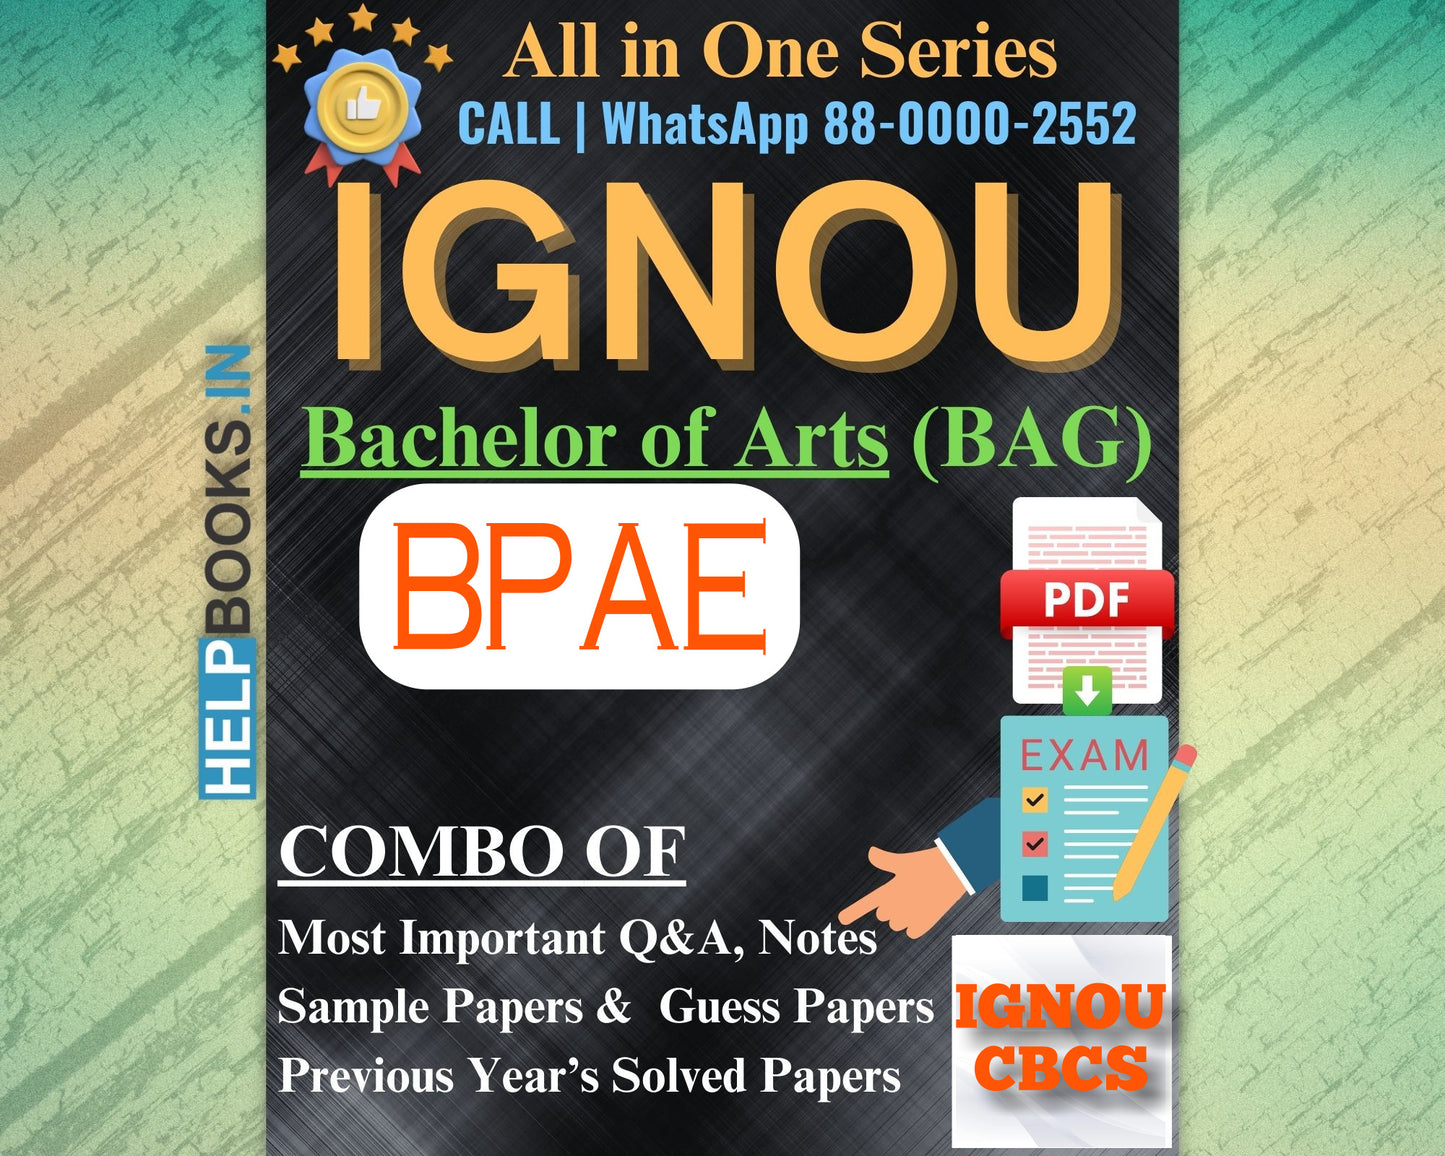 IGNOU BAG Online Study Package: Bachelor of Arts (BA) - Previous Year’s Solved Papers, Q&A, Exam Notes, Sample Papers, Guess Papers-BPAE141, BPAE142, BPAE143, BPAE144